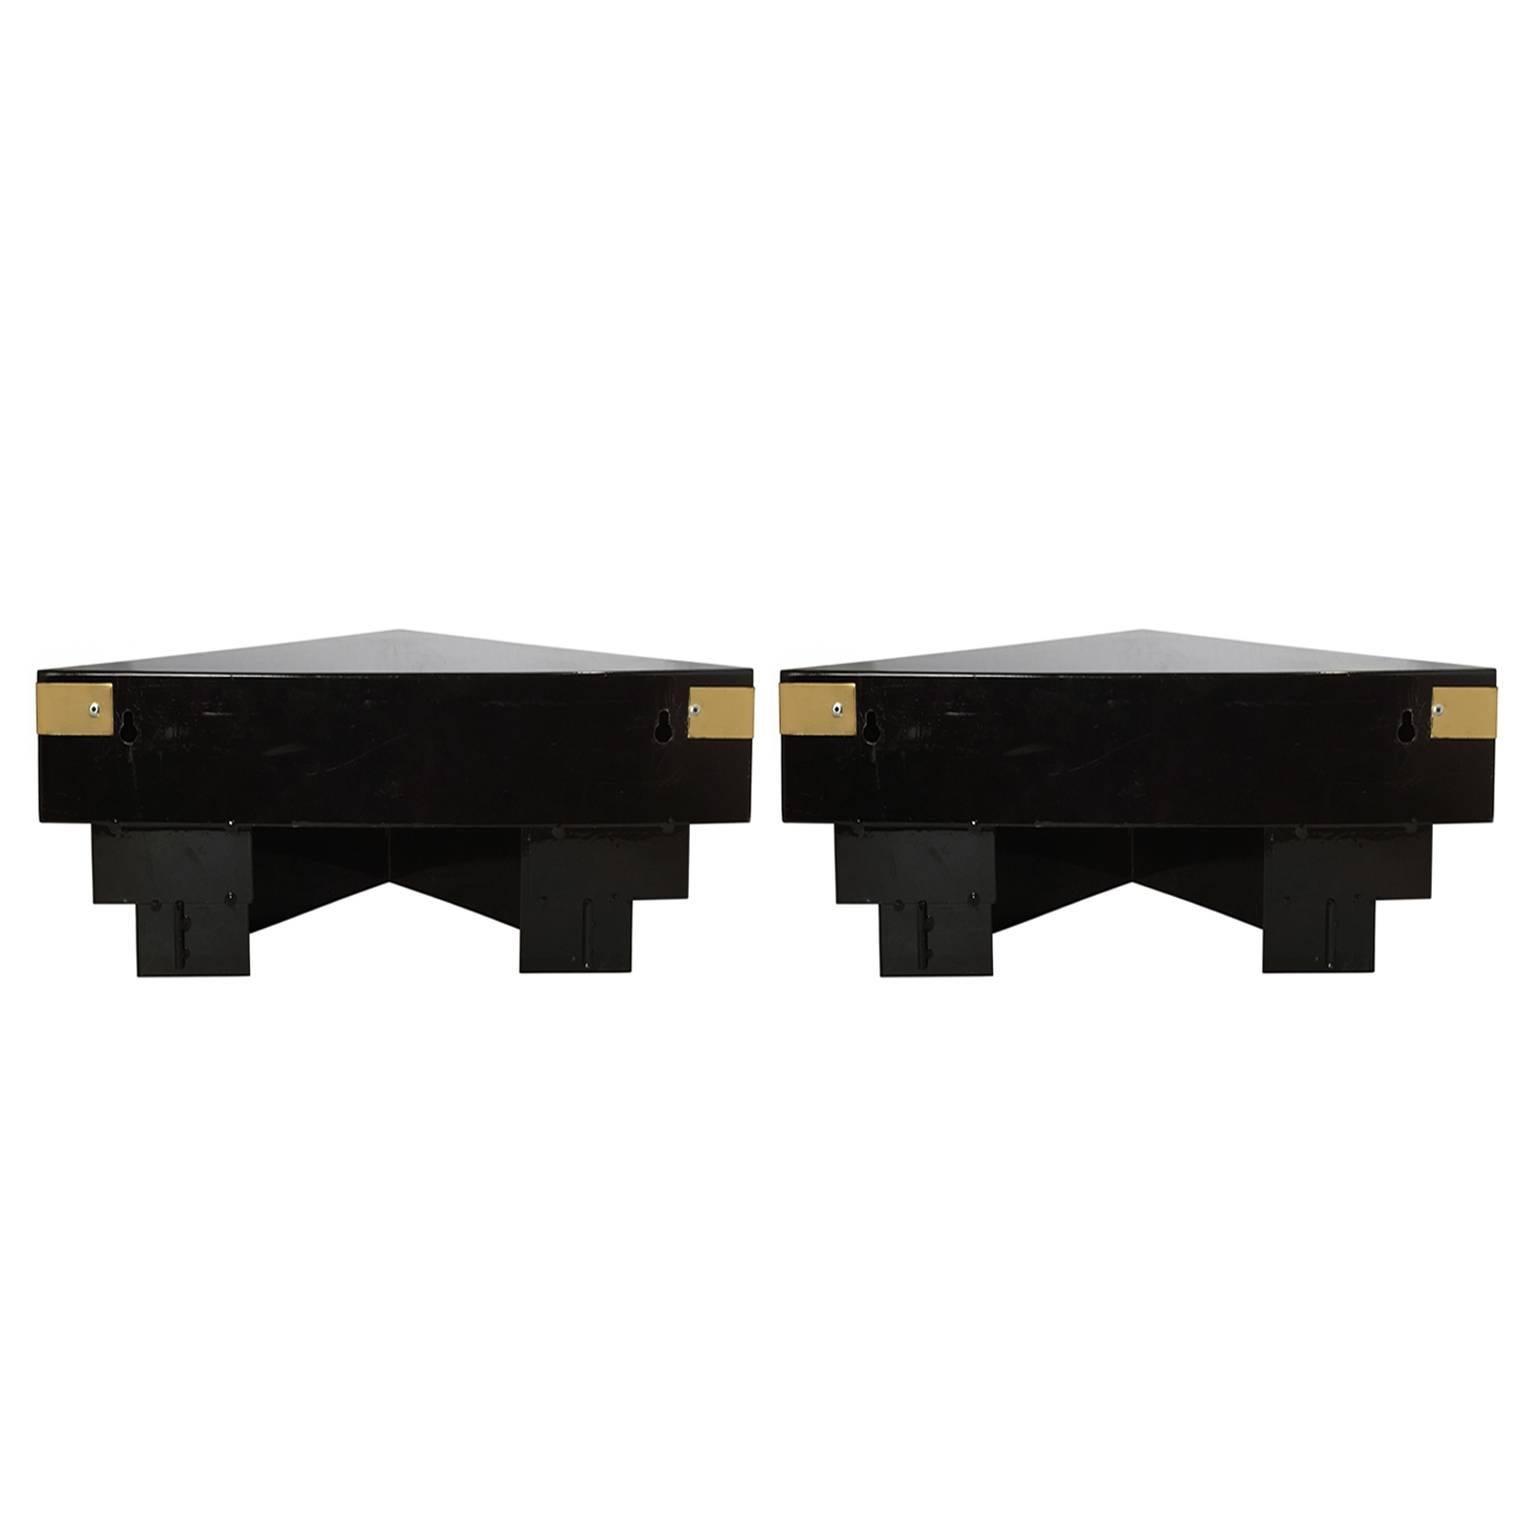 American Pair of C. Jeré Triangular Black and Brass Wall Shelves